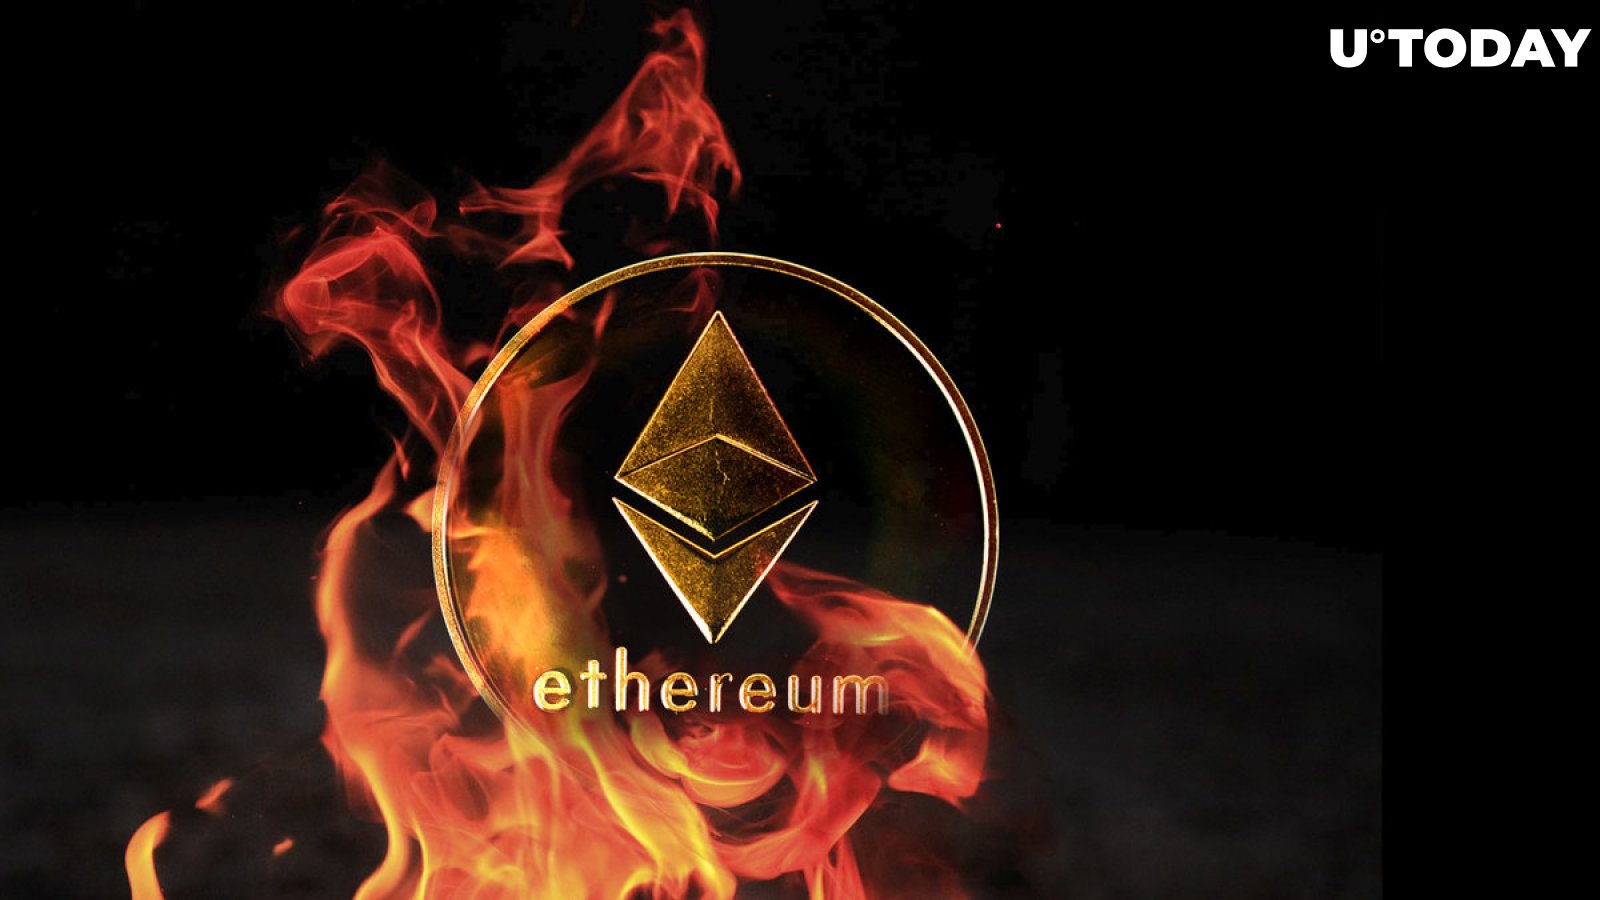 Ethereum (ETH) Burn Reaches Levels That Might Start Affecting Price